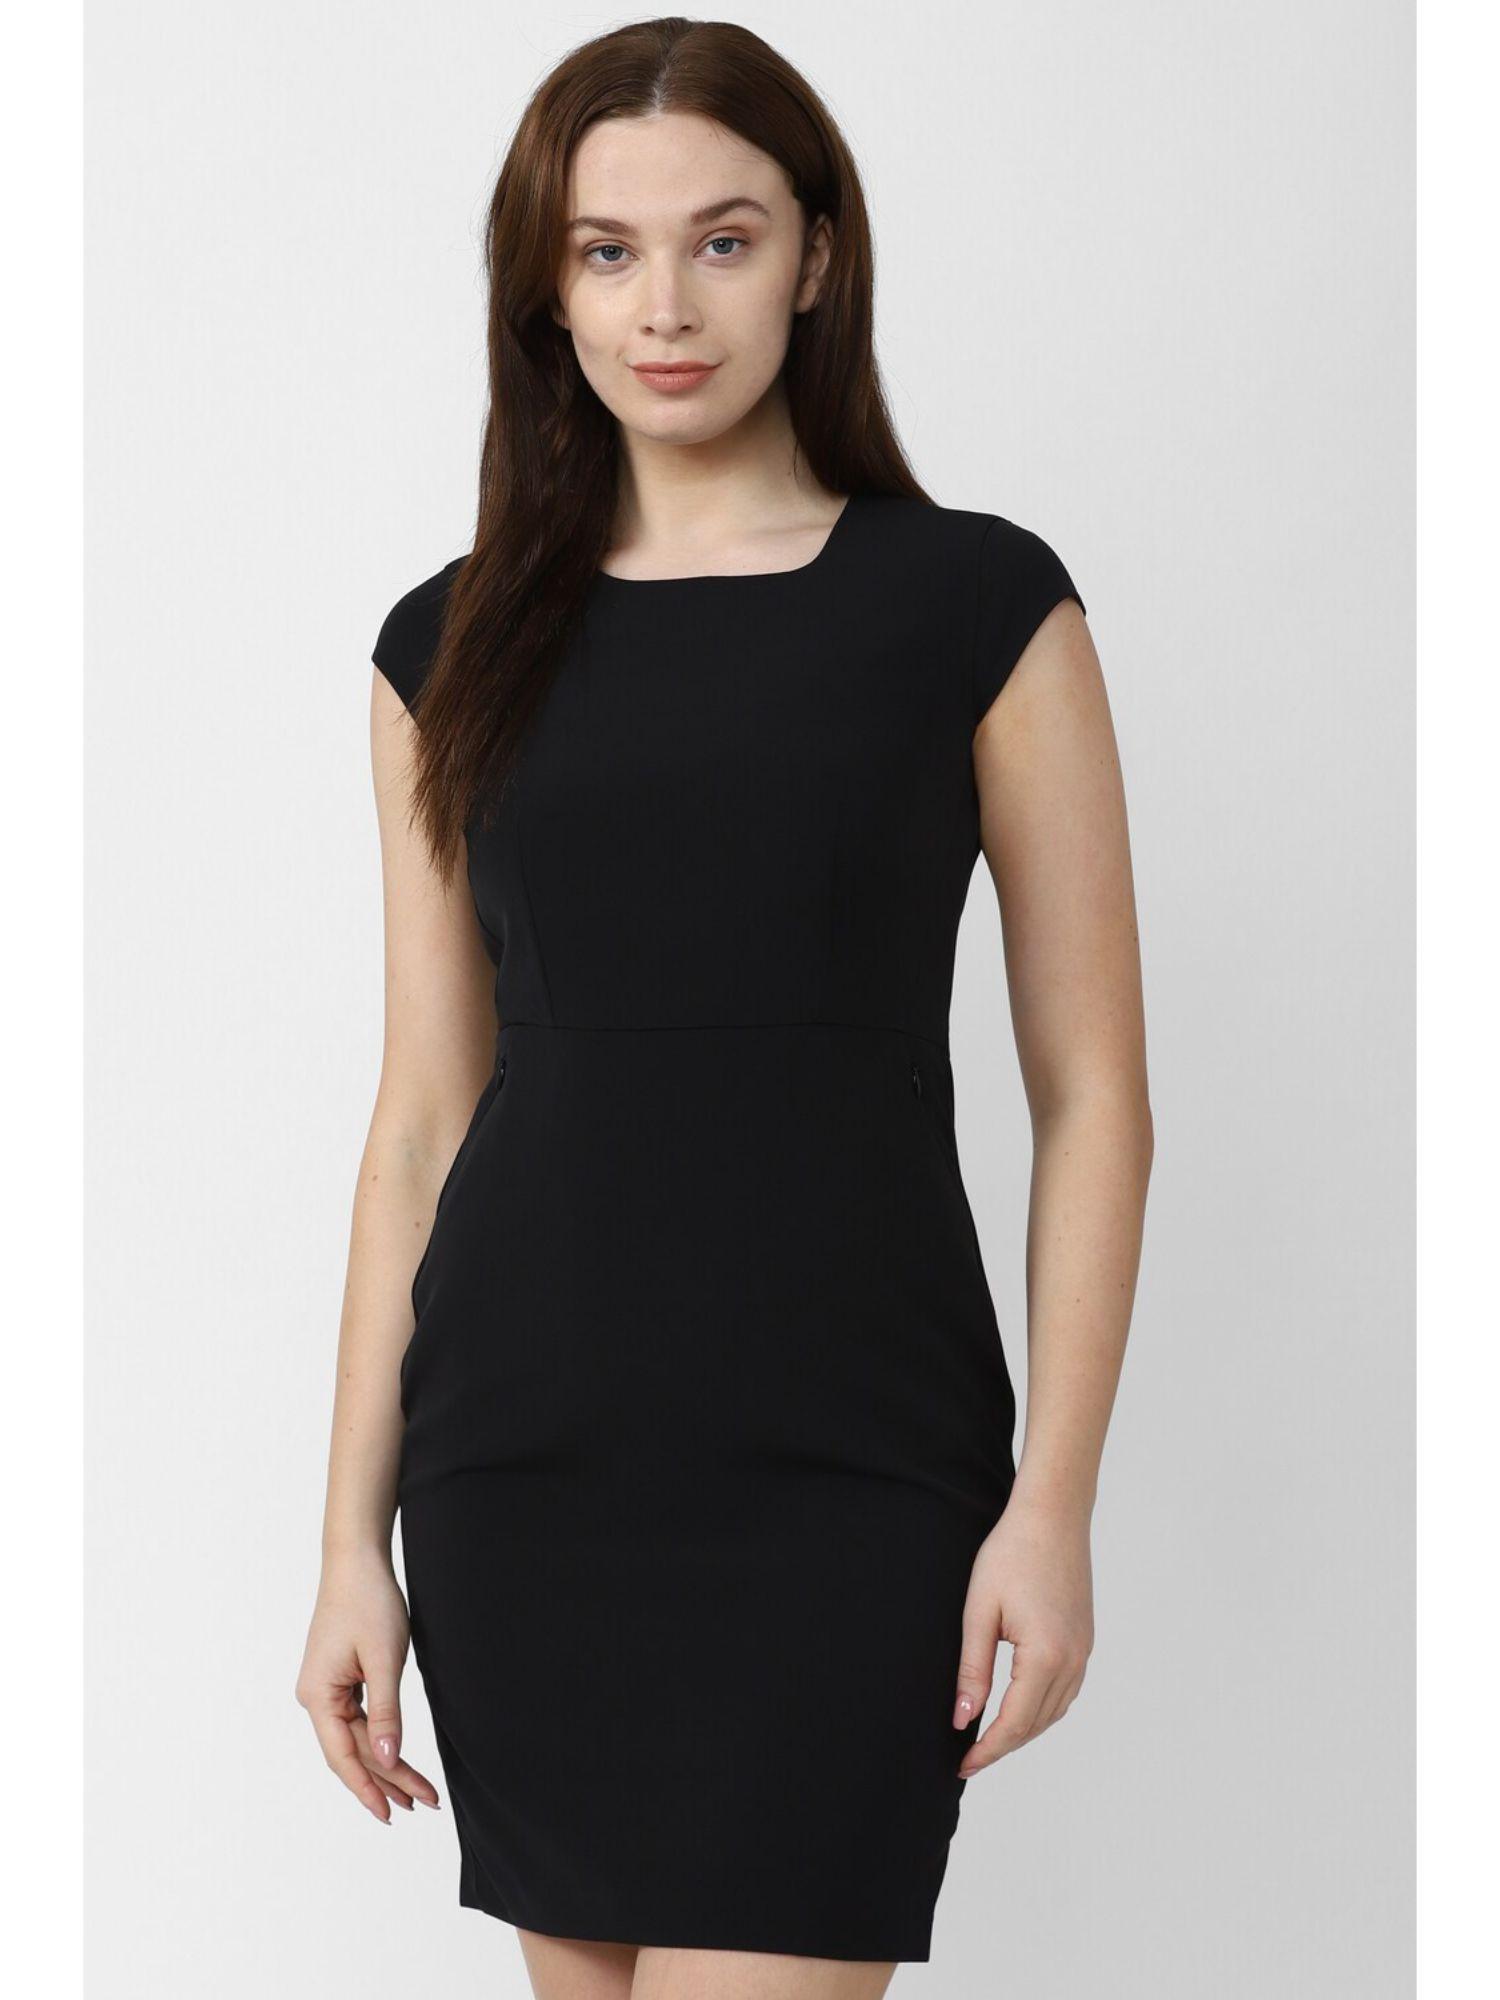 women-black-solid-thigh-length-casual-dress